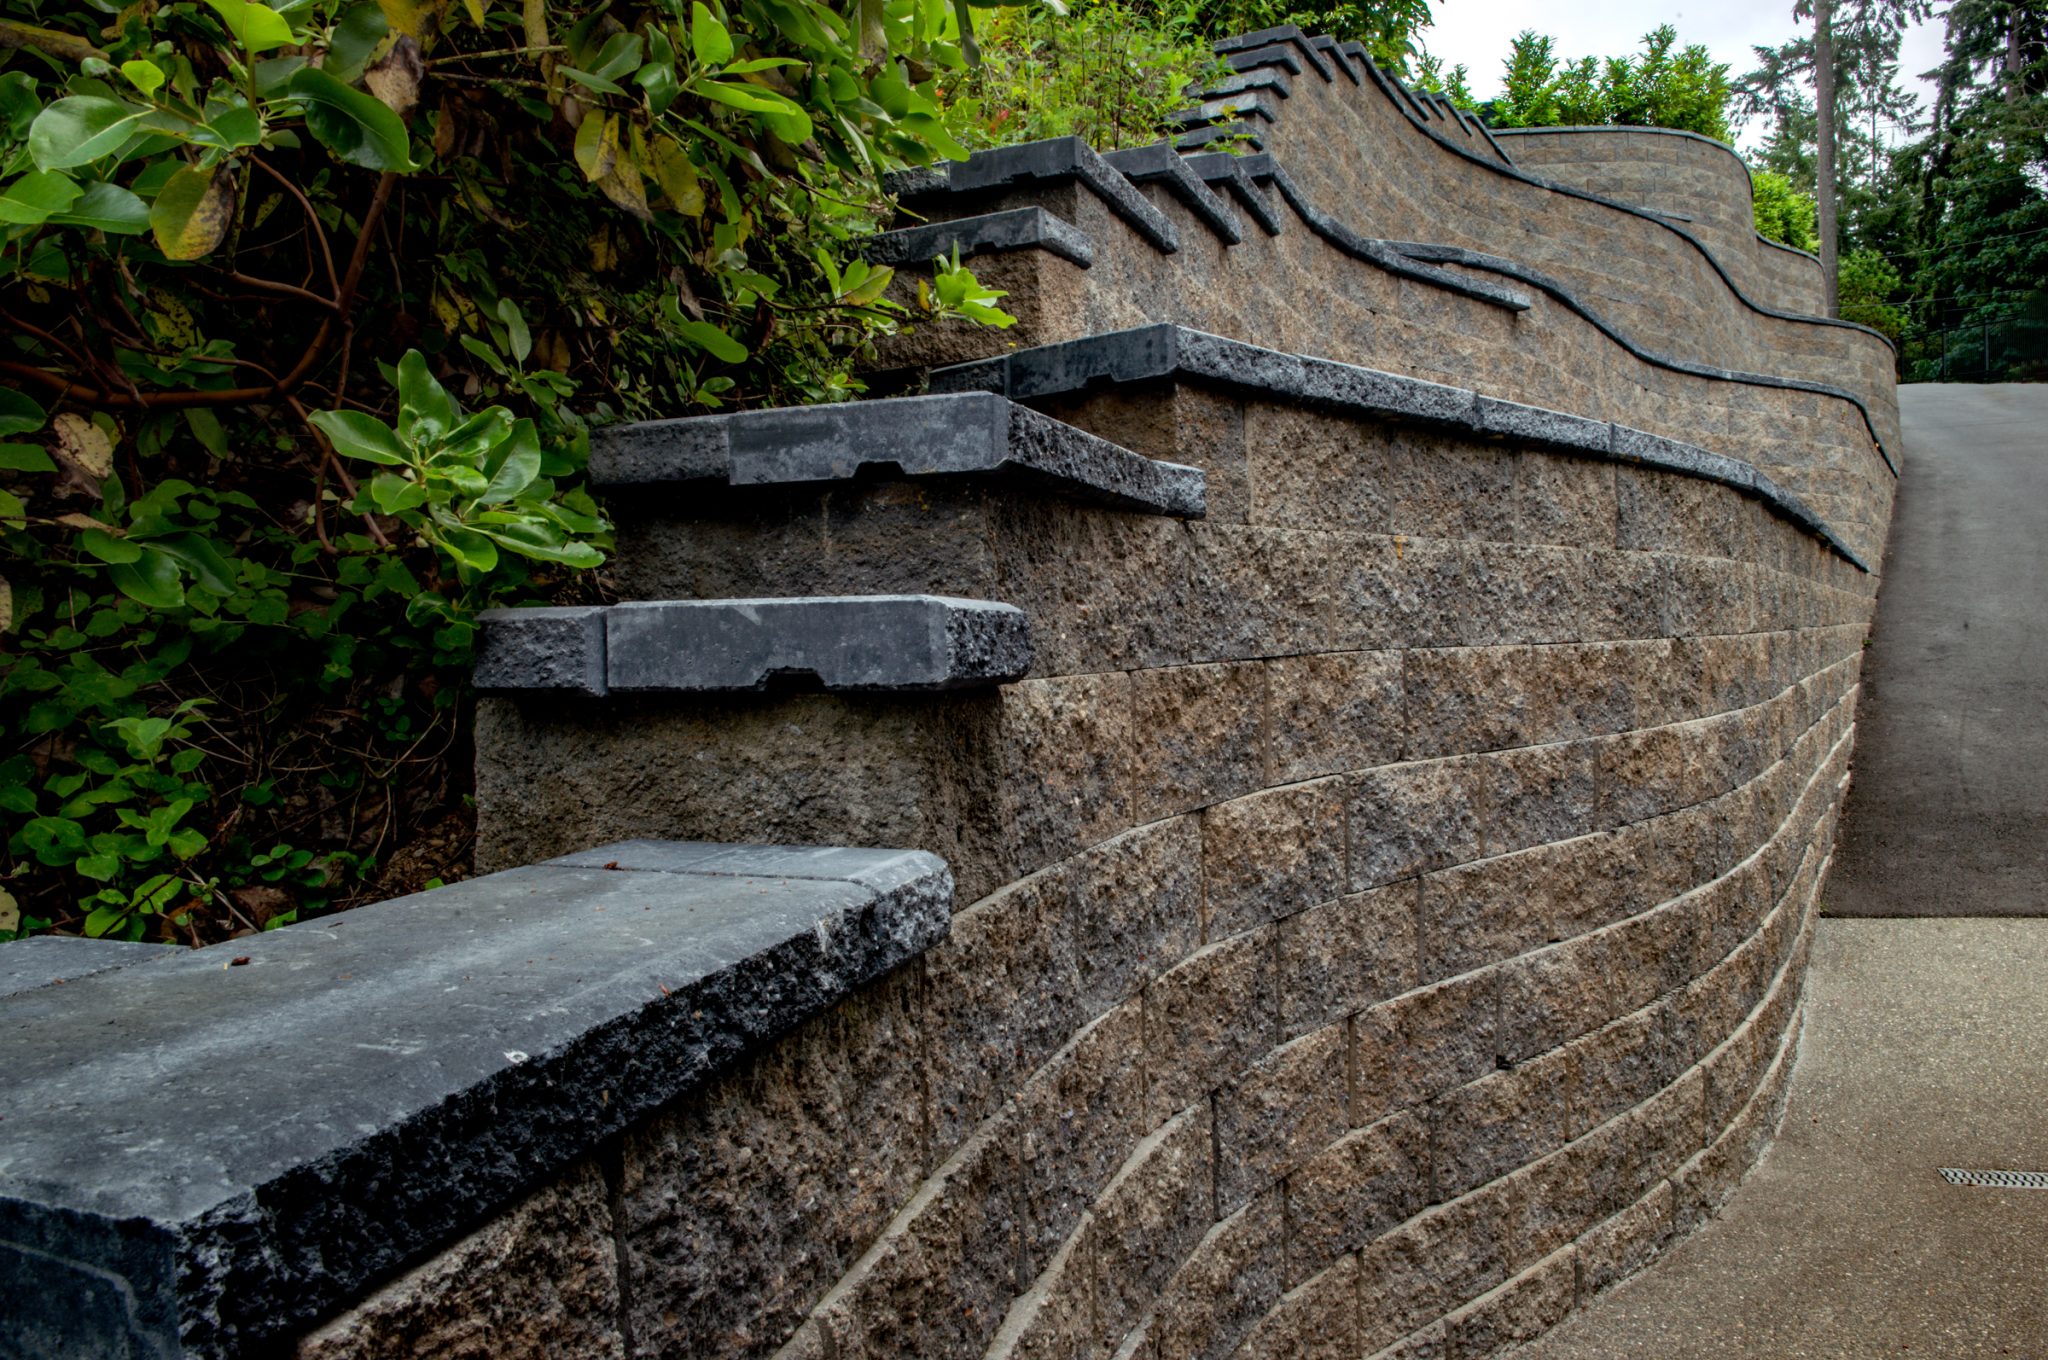 Close-up view of CornerStone 100 curved retaining wall features.